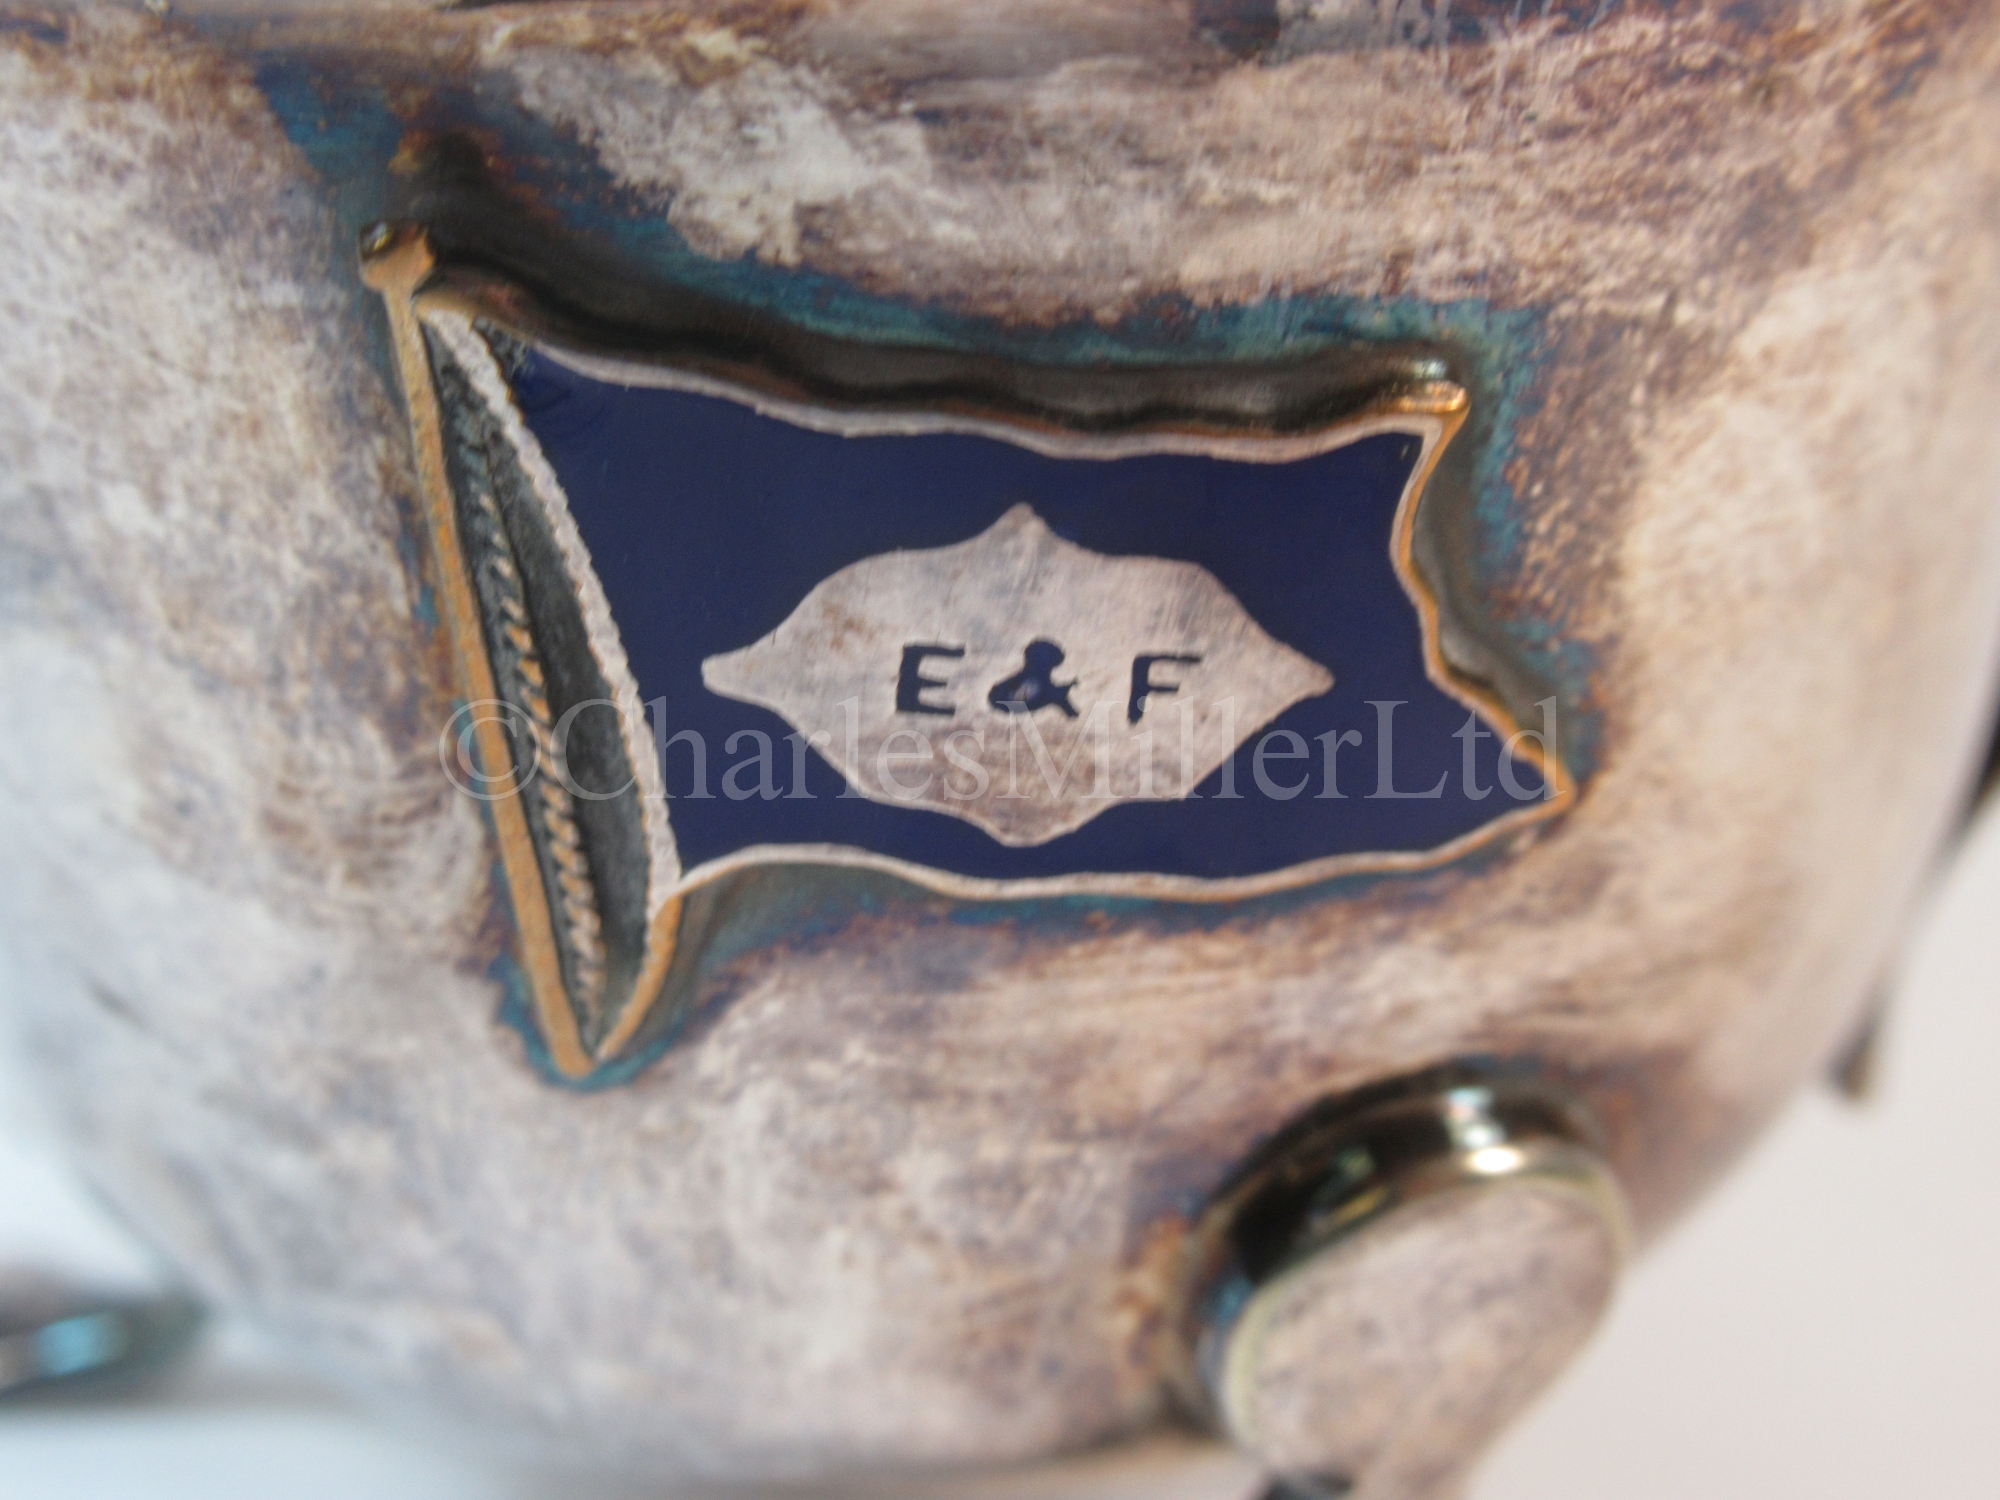 An Elders & Fyffes Line souvenir plated sauce jug, from S.S. 'Carare' - Image 2 of 7